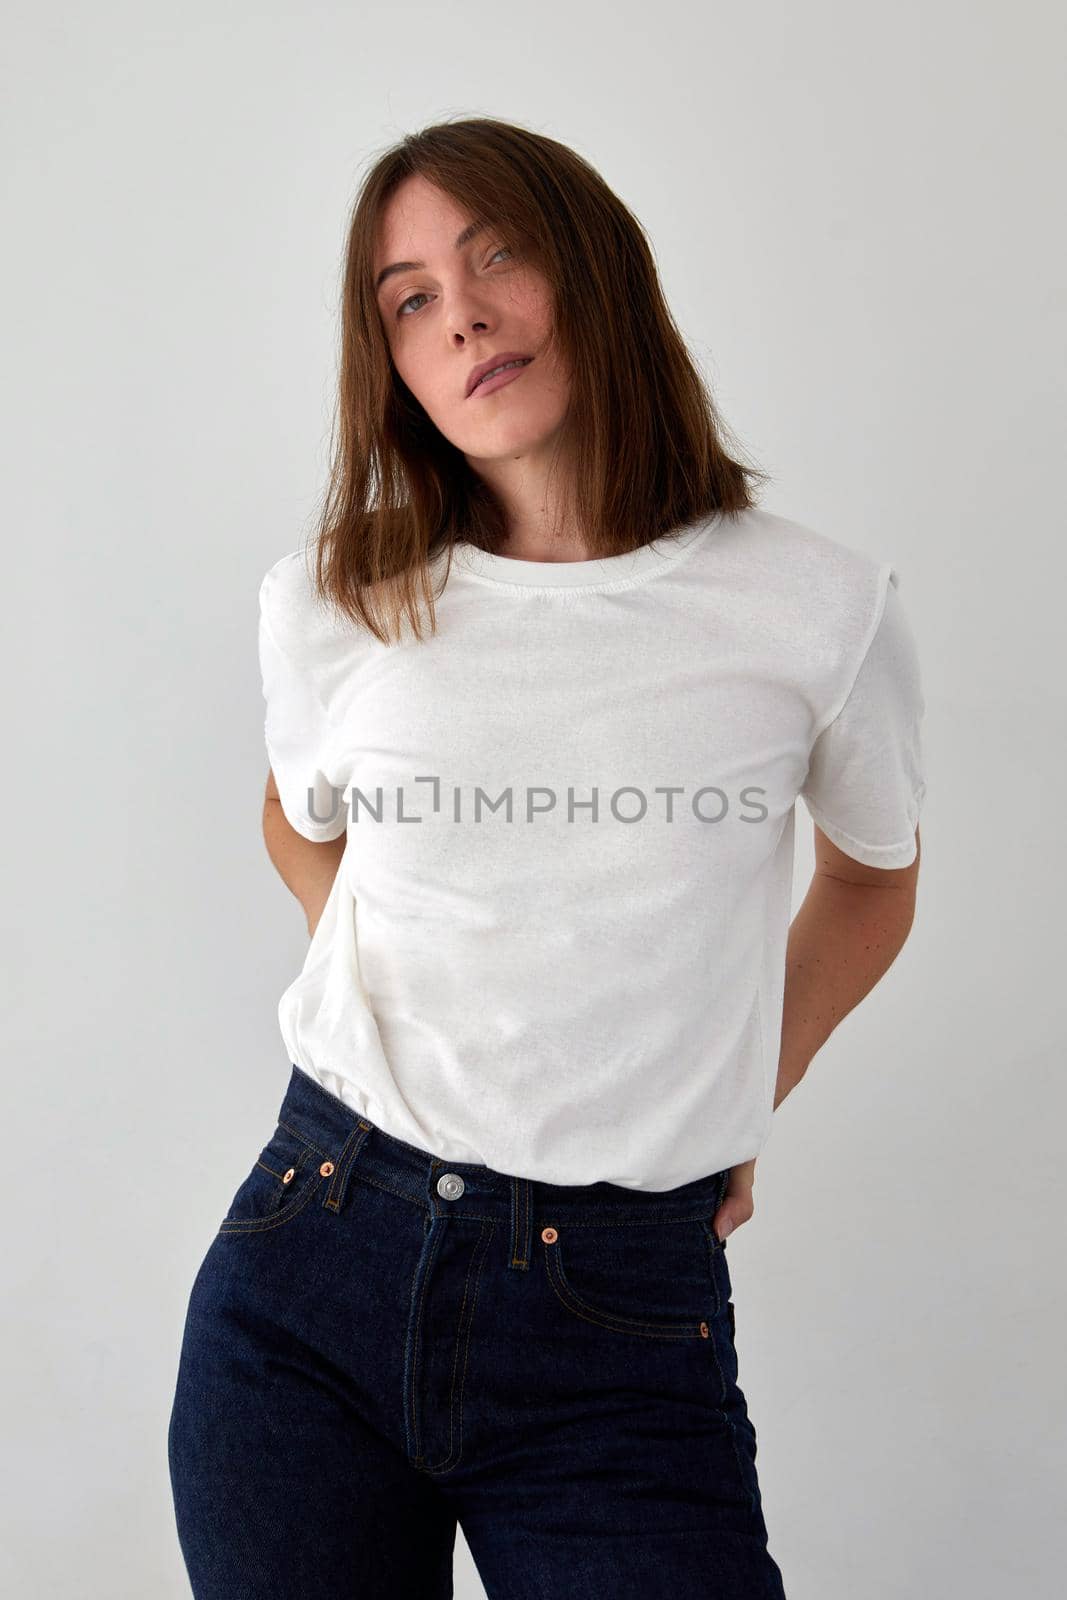 Positive female model wearing white t shirt and jeans standing with hands on waist against white background and looking at camera